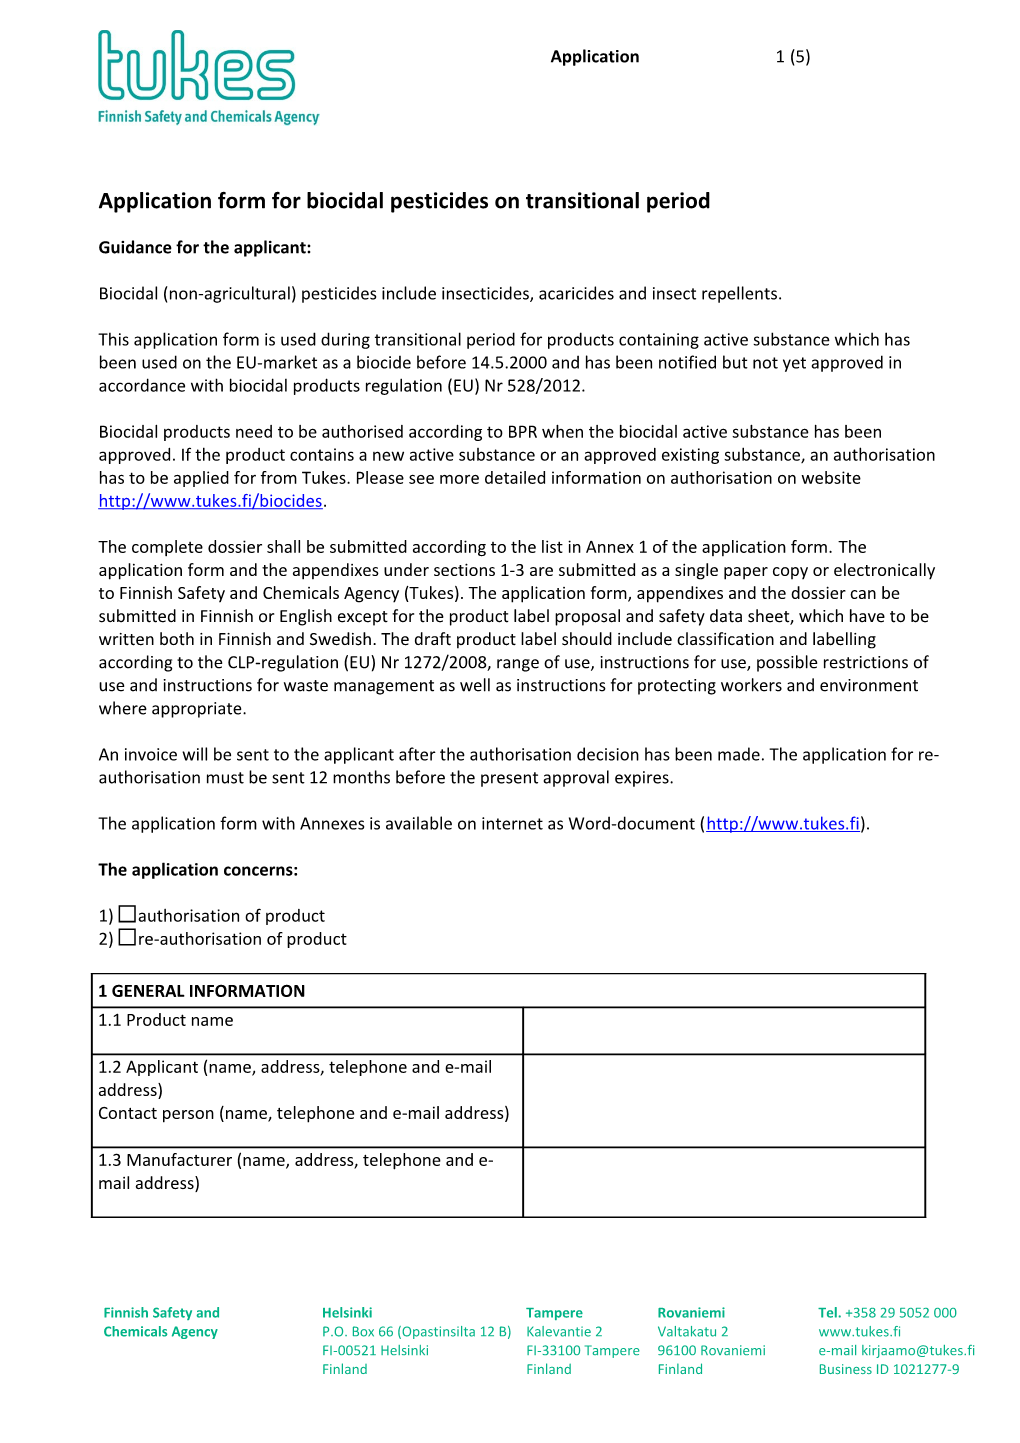 Application Form for Biocidal Pesticides on Transitional Period